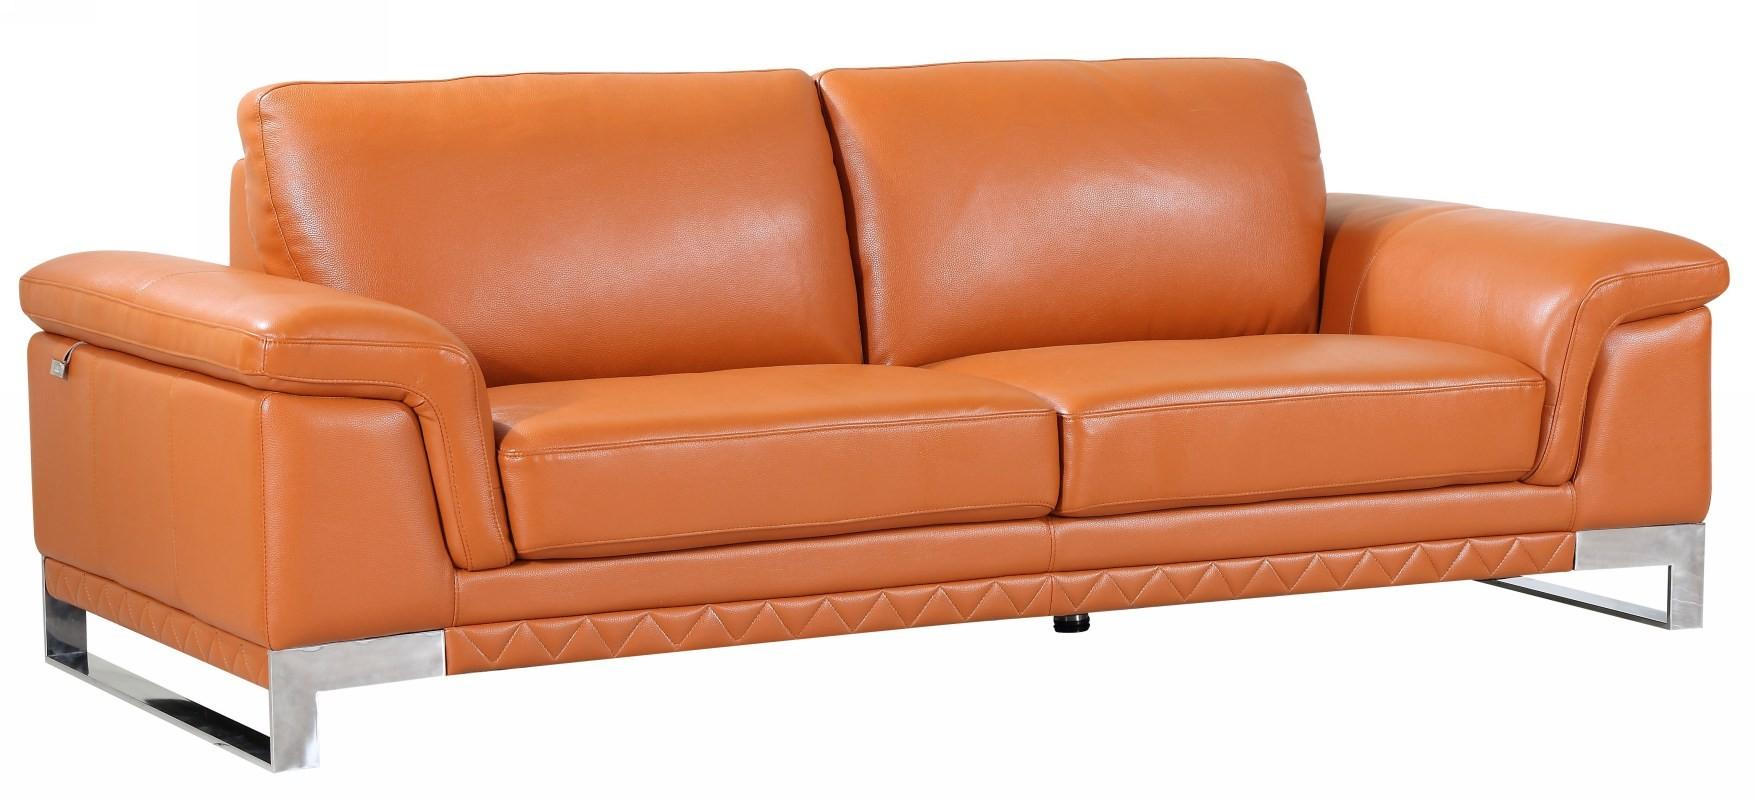 Contemporary Sofa 411 411-CAMEL-S in Camel Genuine Leather